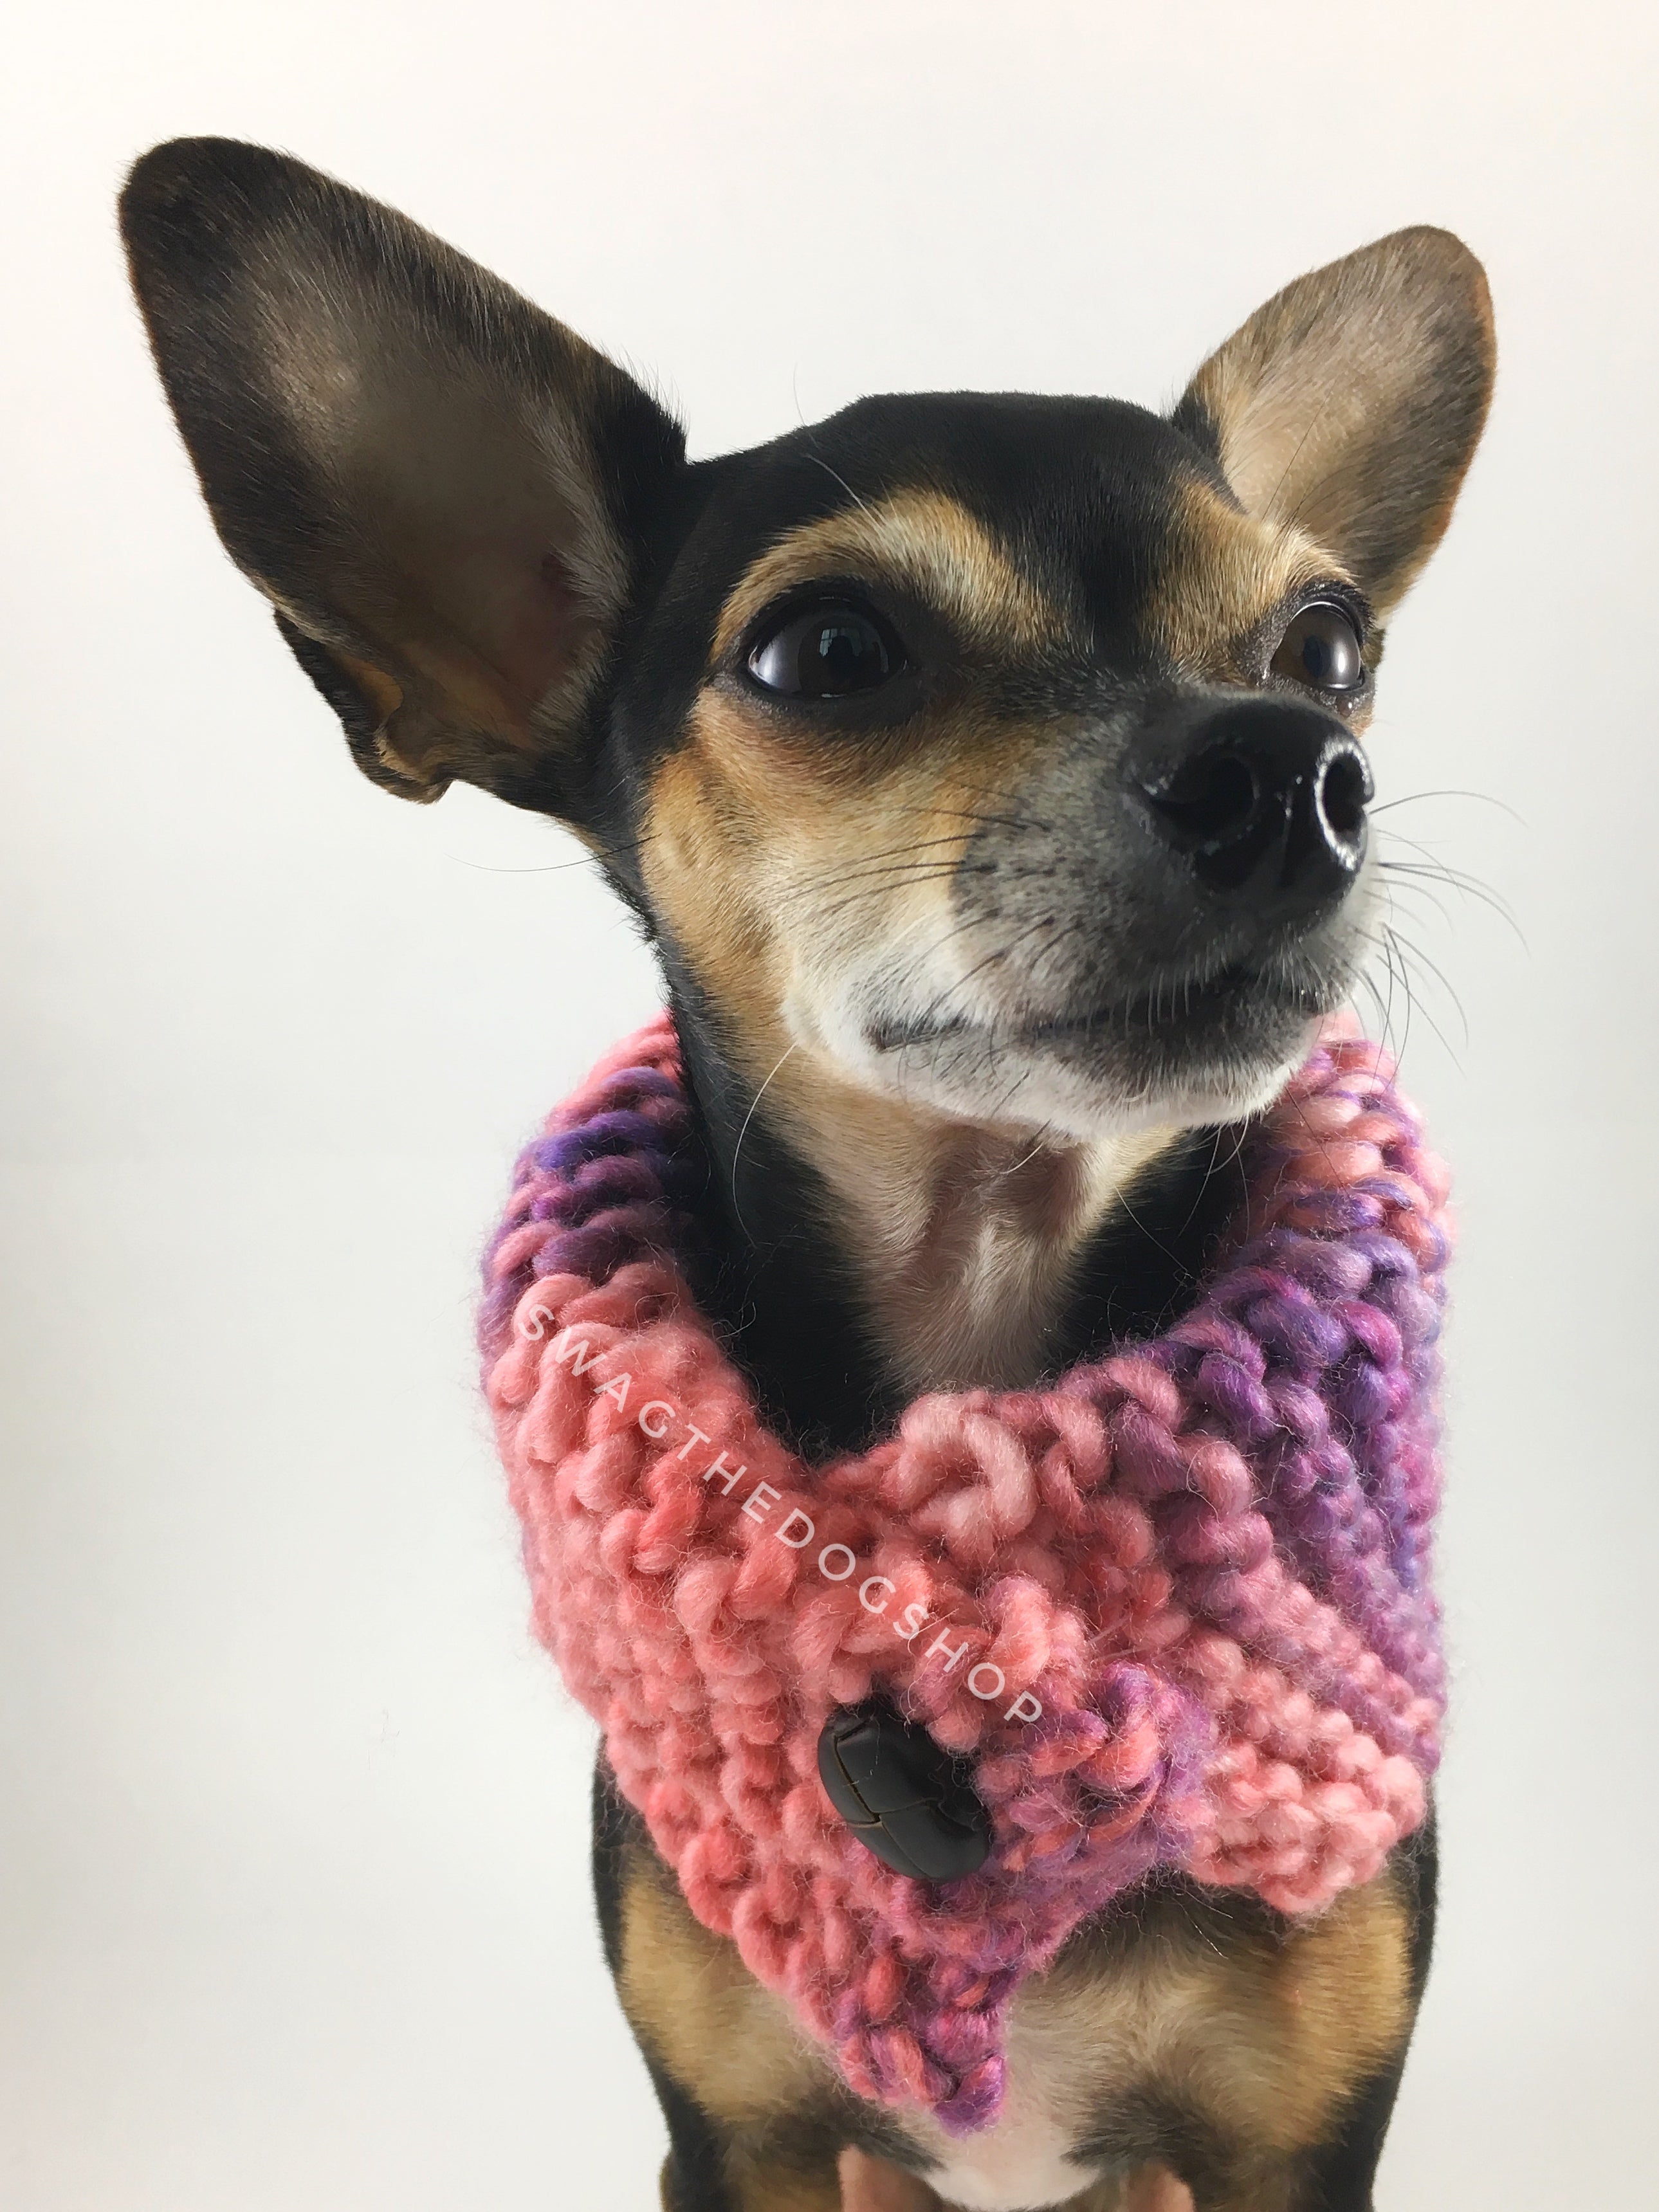 Cotton Candy Swagsnood - Close Up View of Cute Chihuahua Dog Wearing Mixed Color of Pink, Purple and Salmon Pink Dog Snood with Accent Button